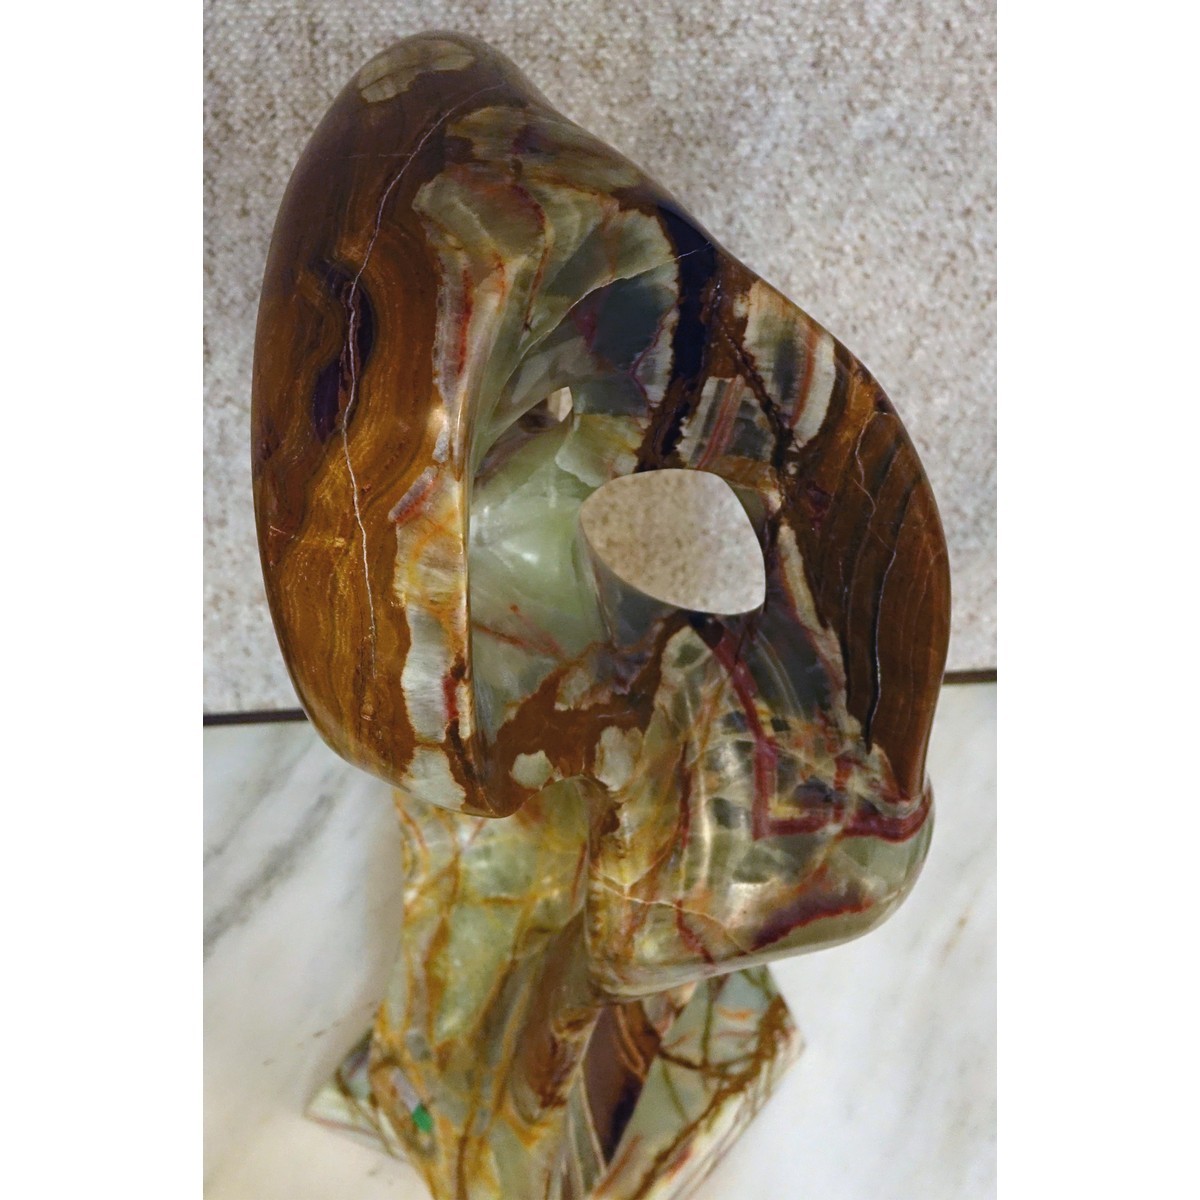 Large Carved Onyx Abstract-Free Form Sculpture on Matching Base Signed Bernie M. Good condition.